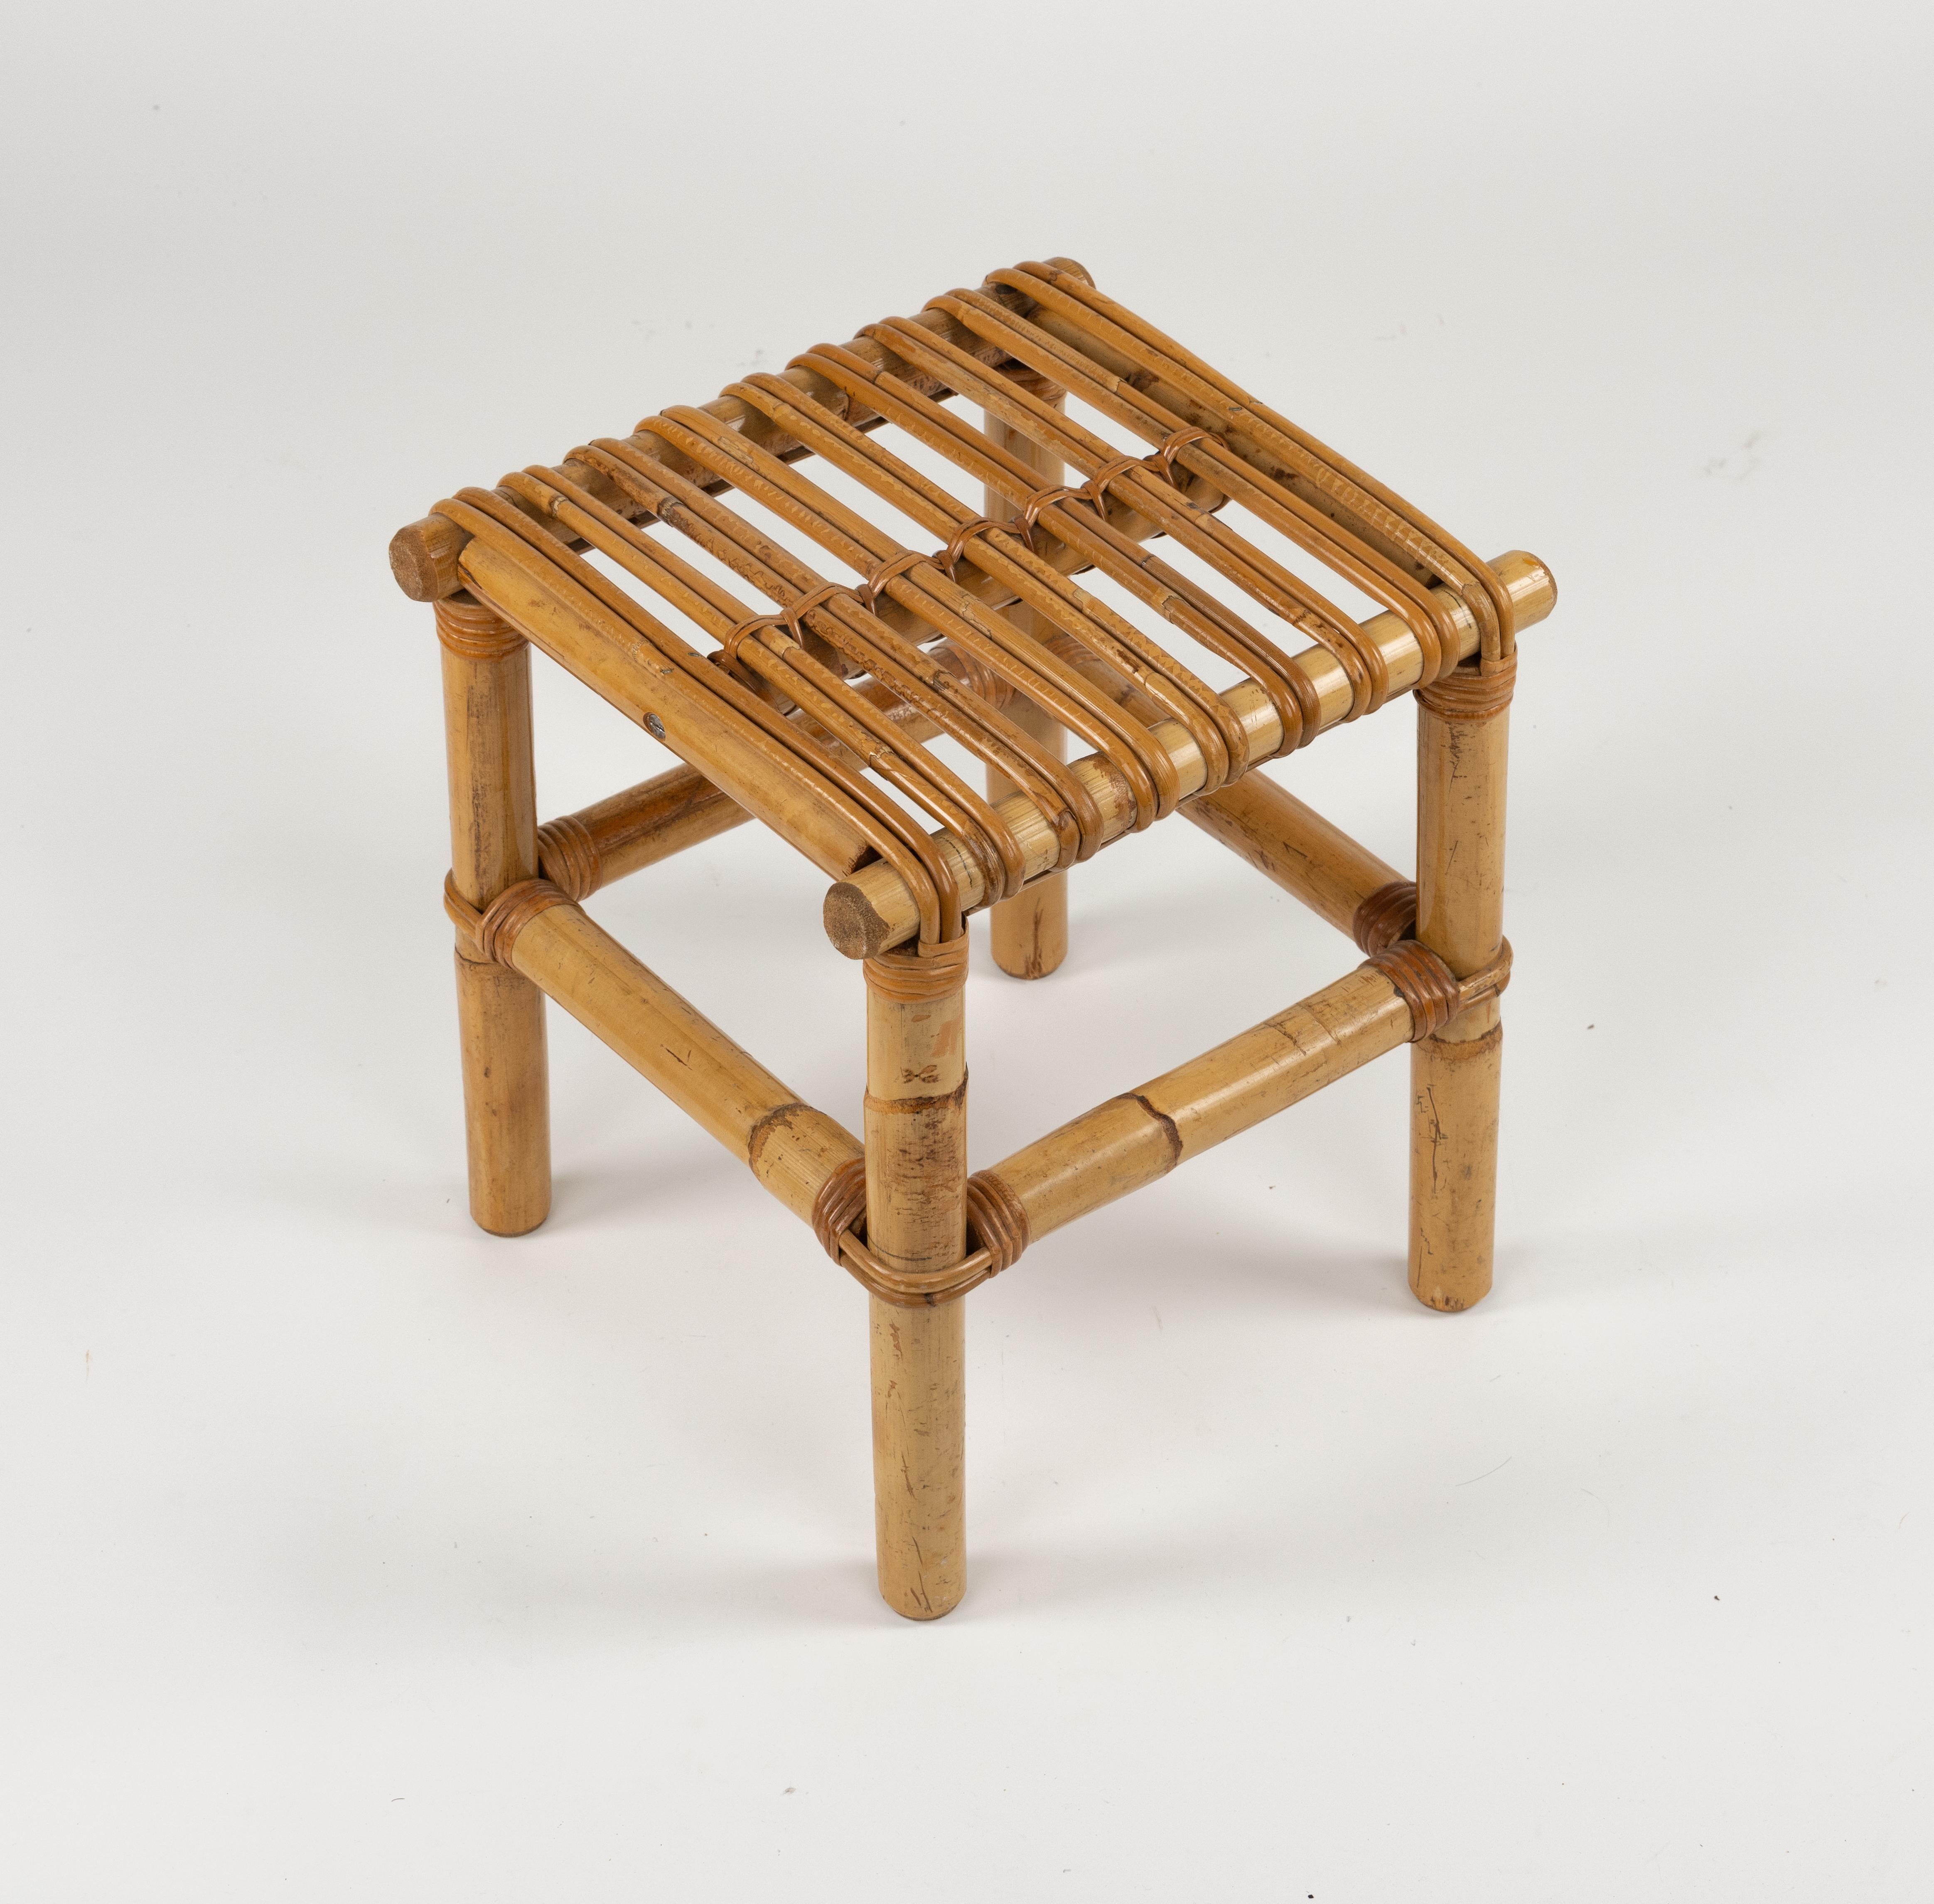 Beautiful midcentury squared stool, pouf or side table.   

This fantastic Stool was made in Italy during the 1970s.

The workmanship of these stool is exceptional, the bamboo structure allows this stool to be light and solid at the same time.